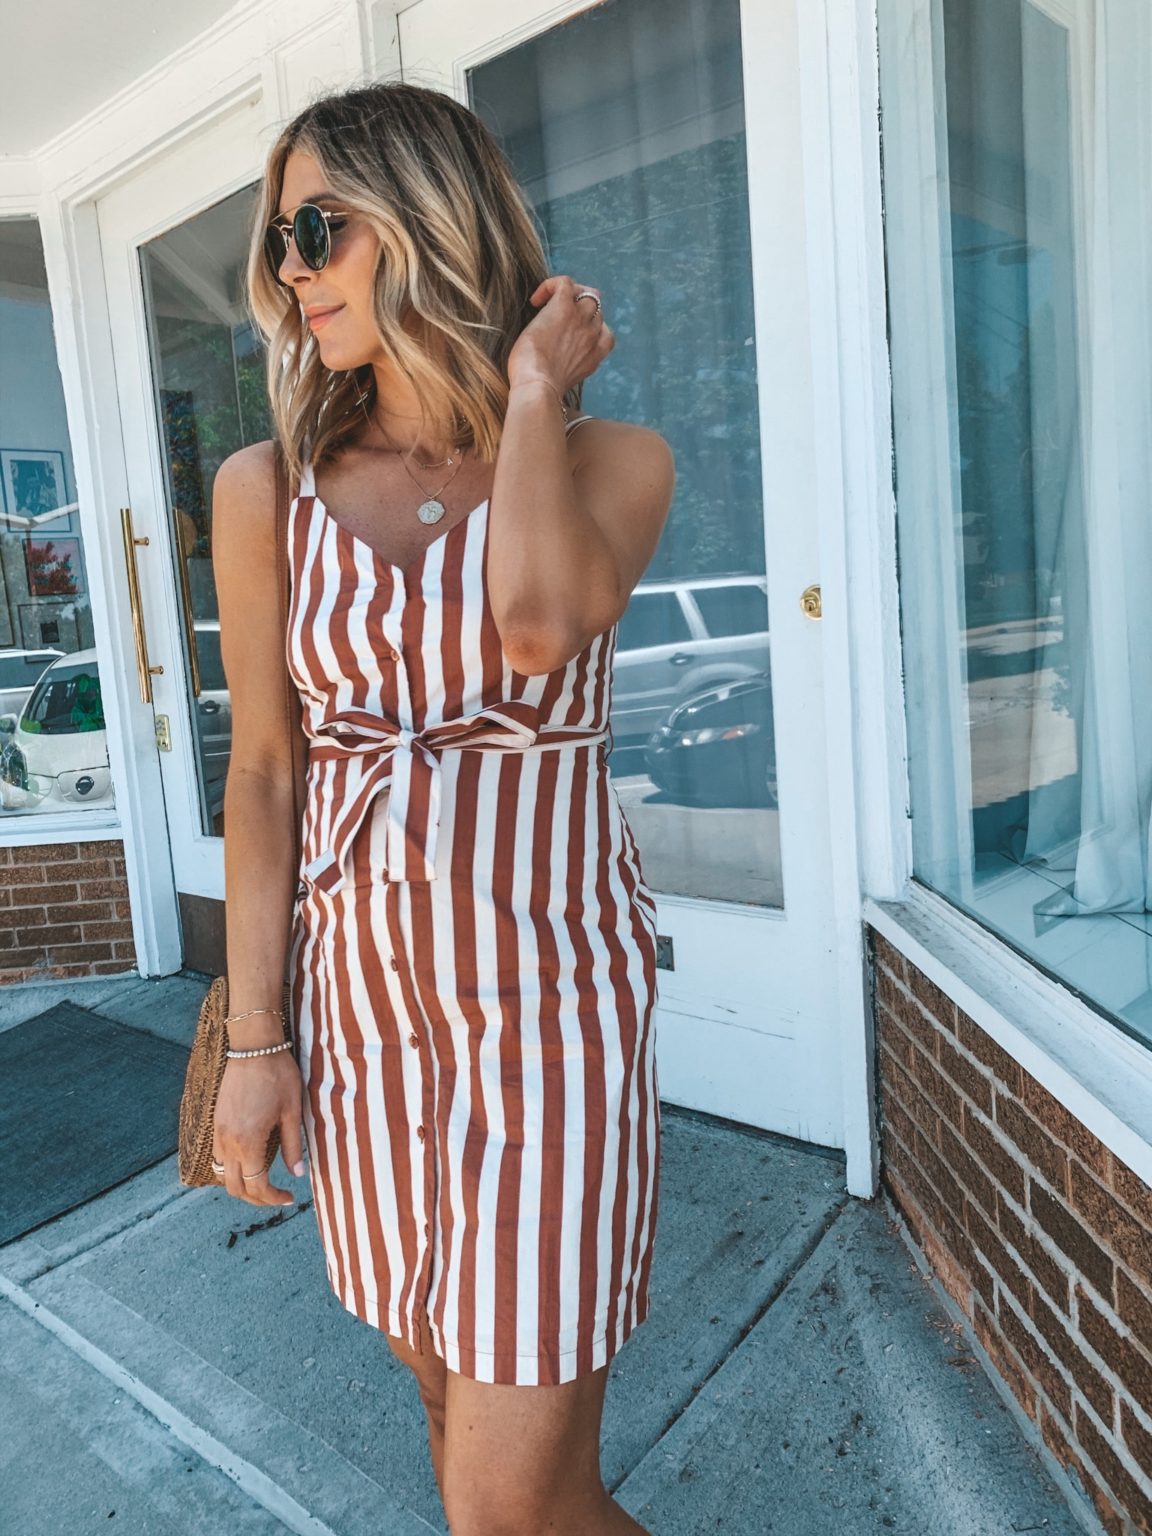 The Stripe Dress You Need this Summer